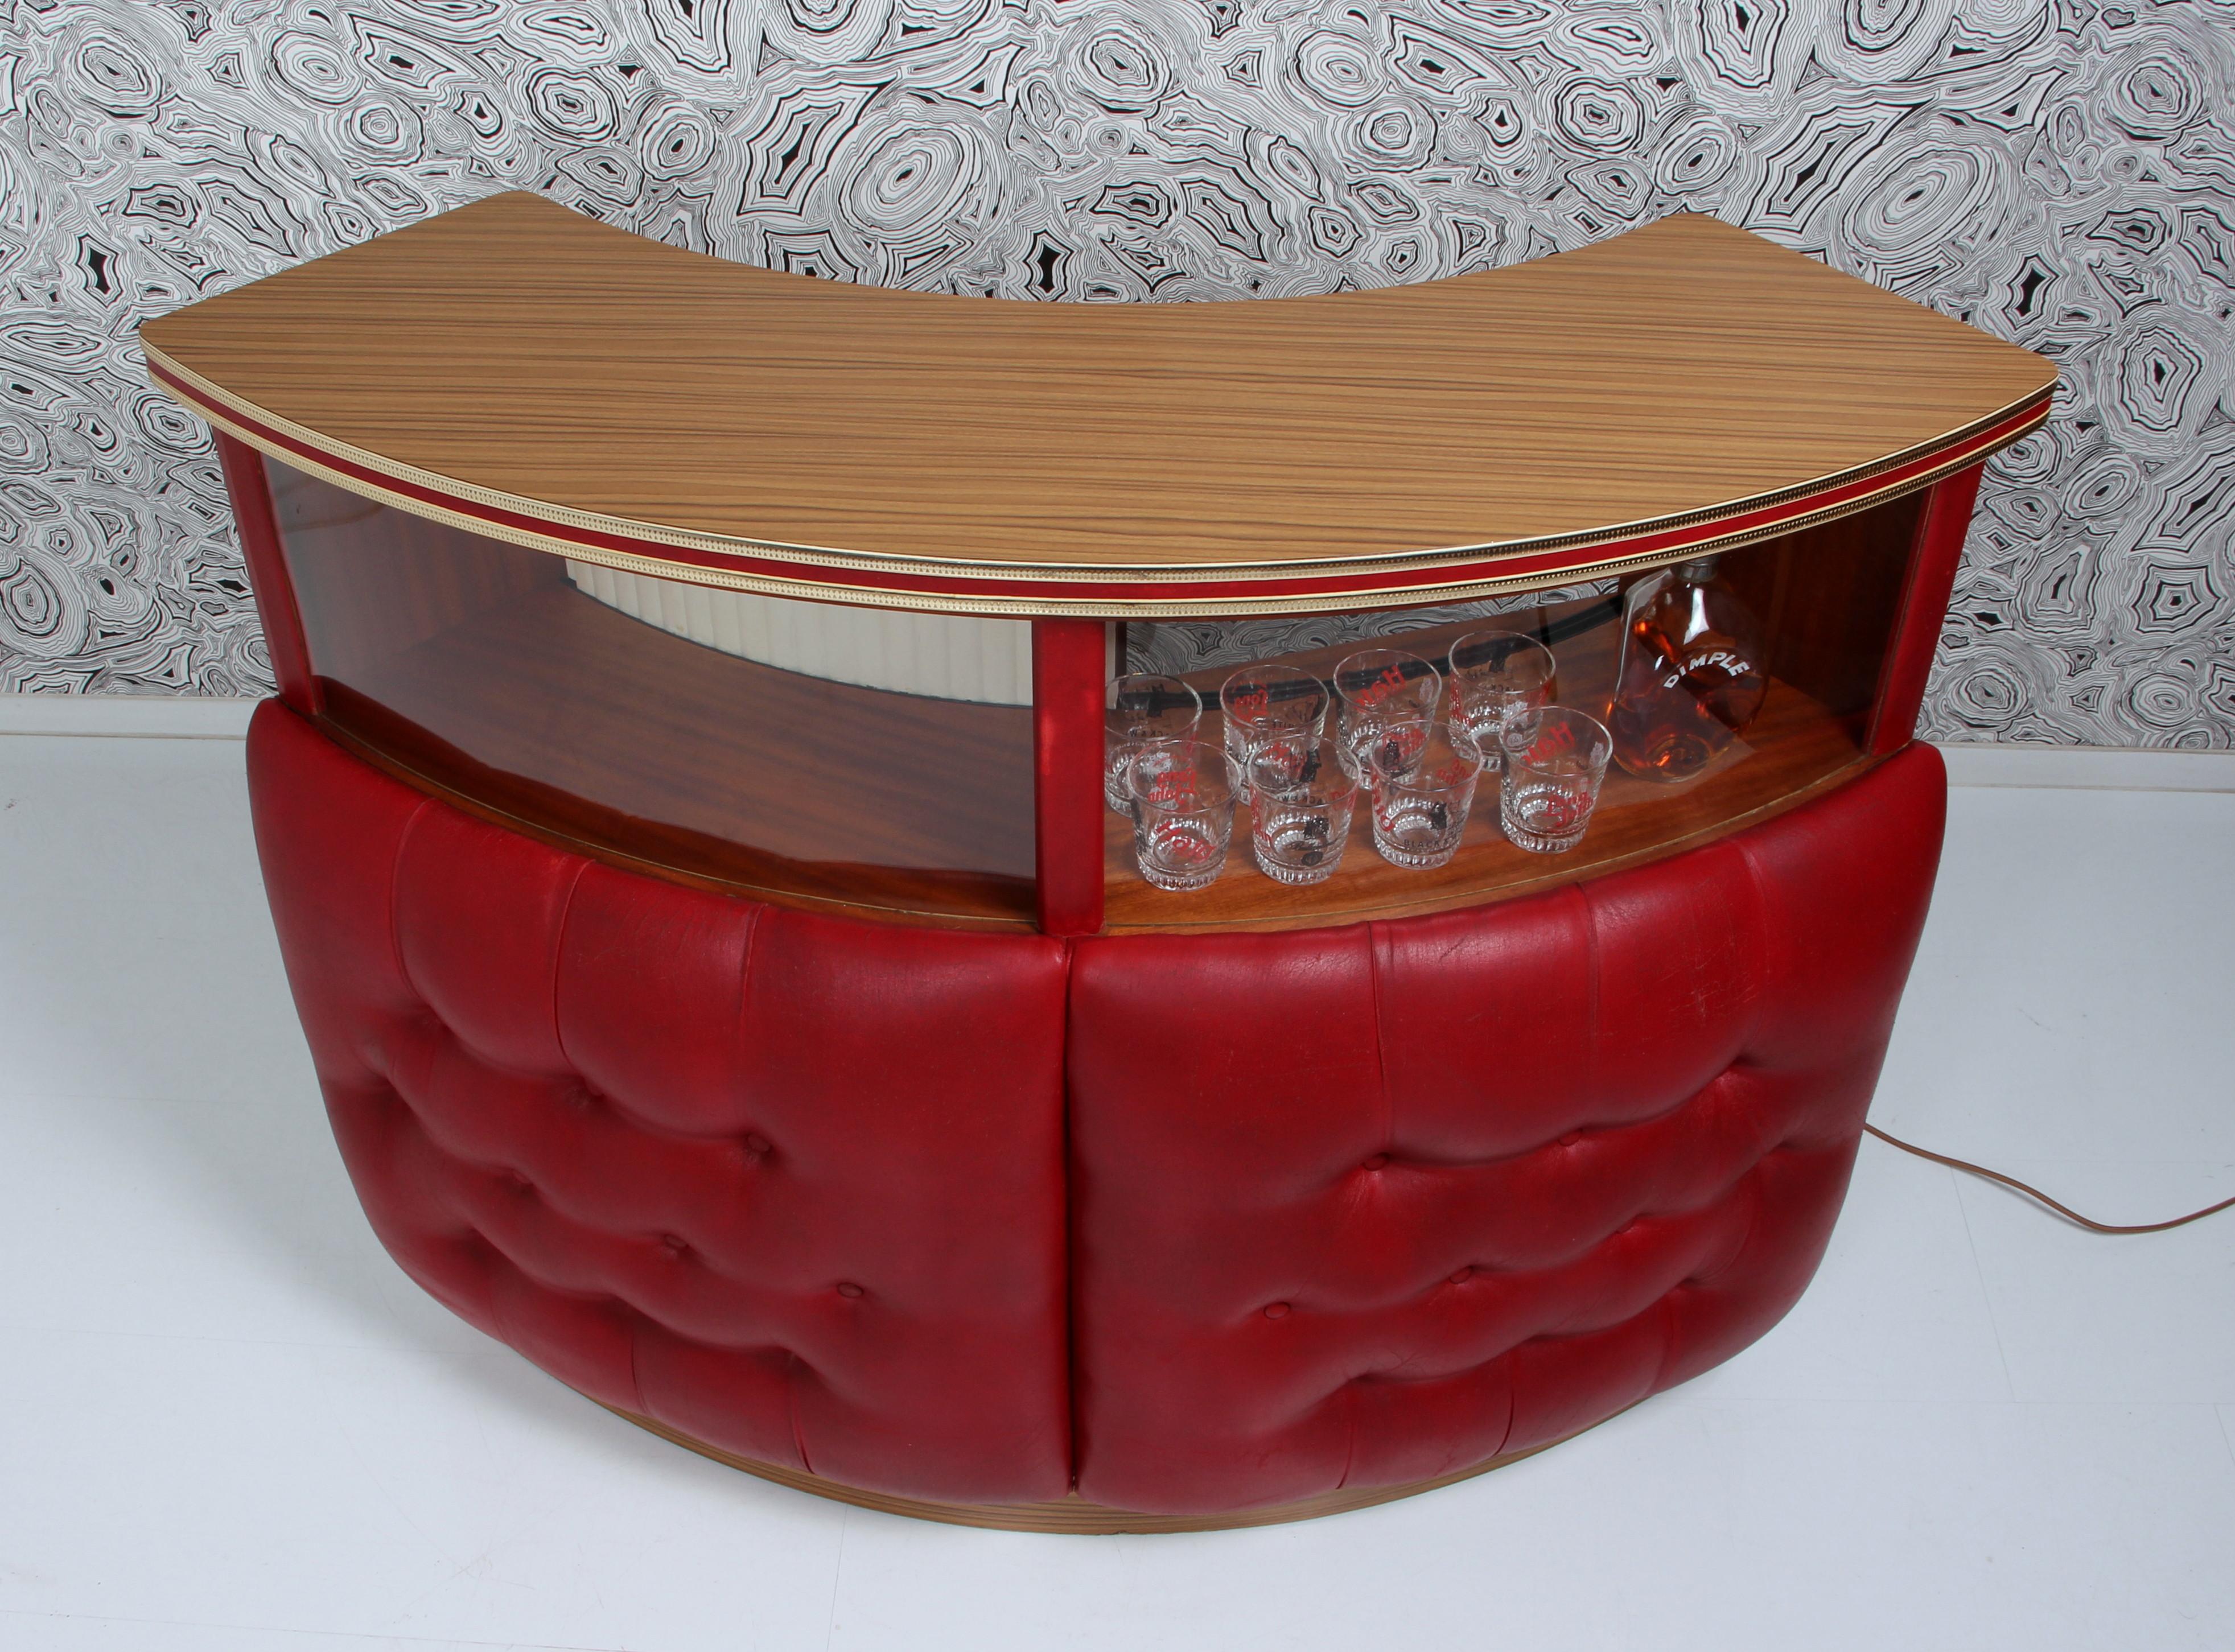 Midcentury Cocktail Bar Drinks Bar Counter Made in England a. Umberto Mascagni  7